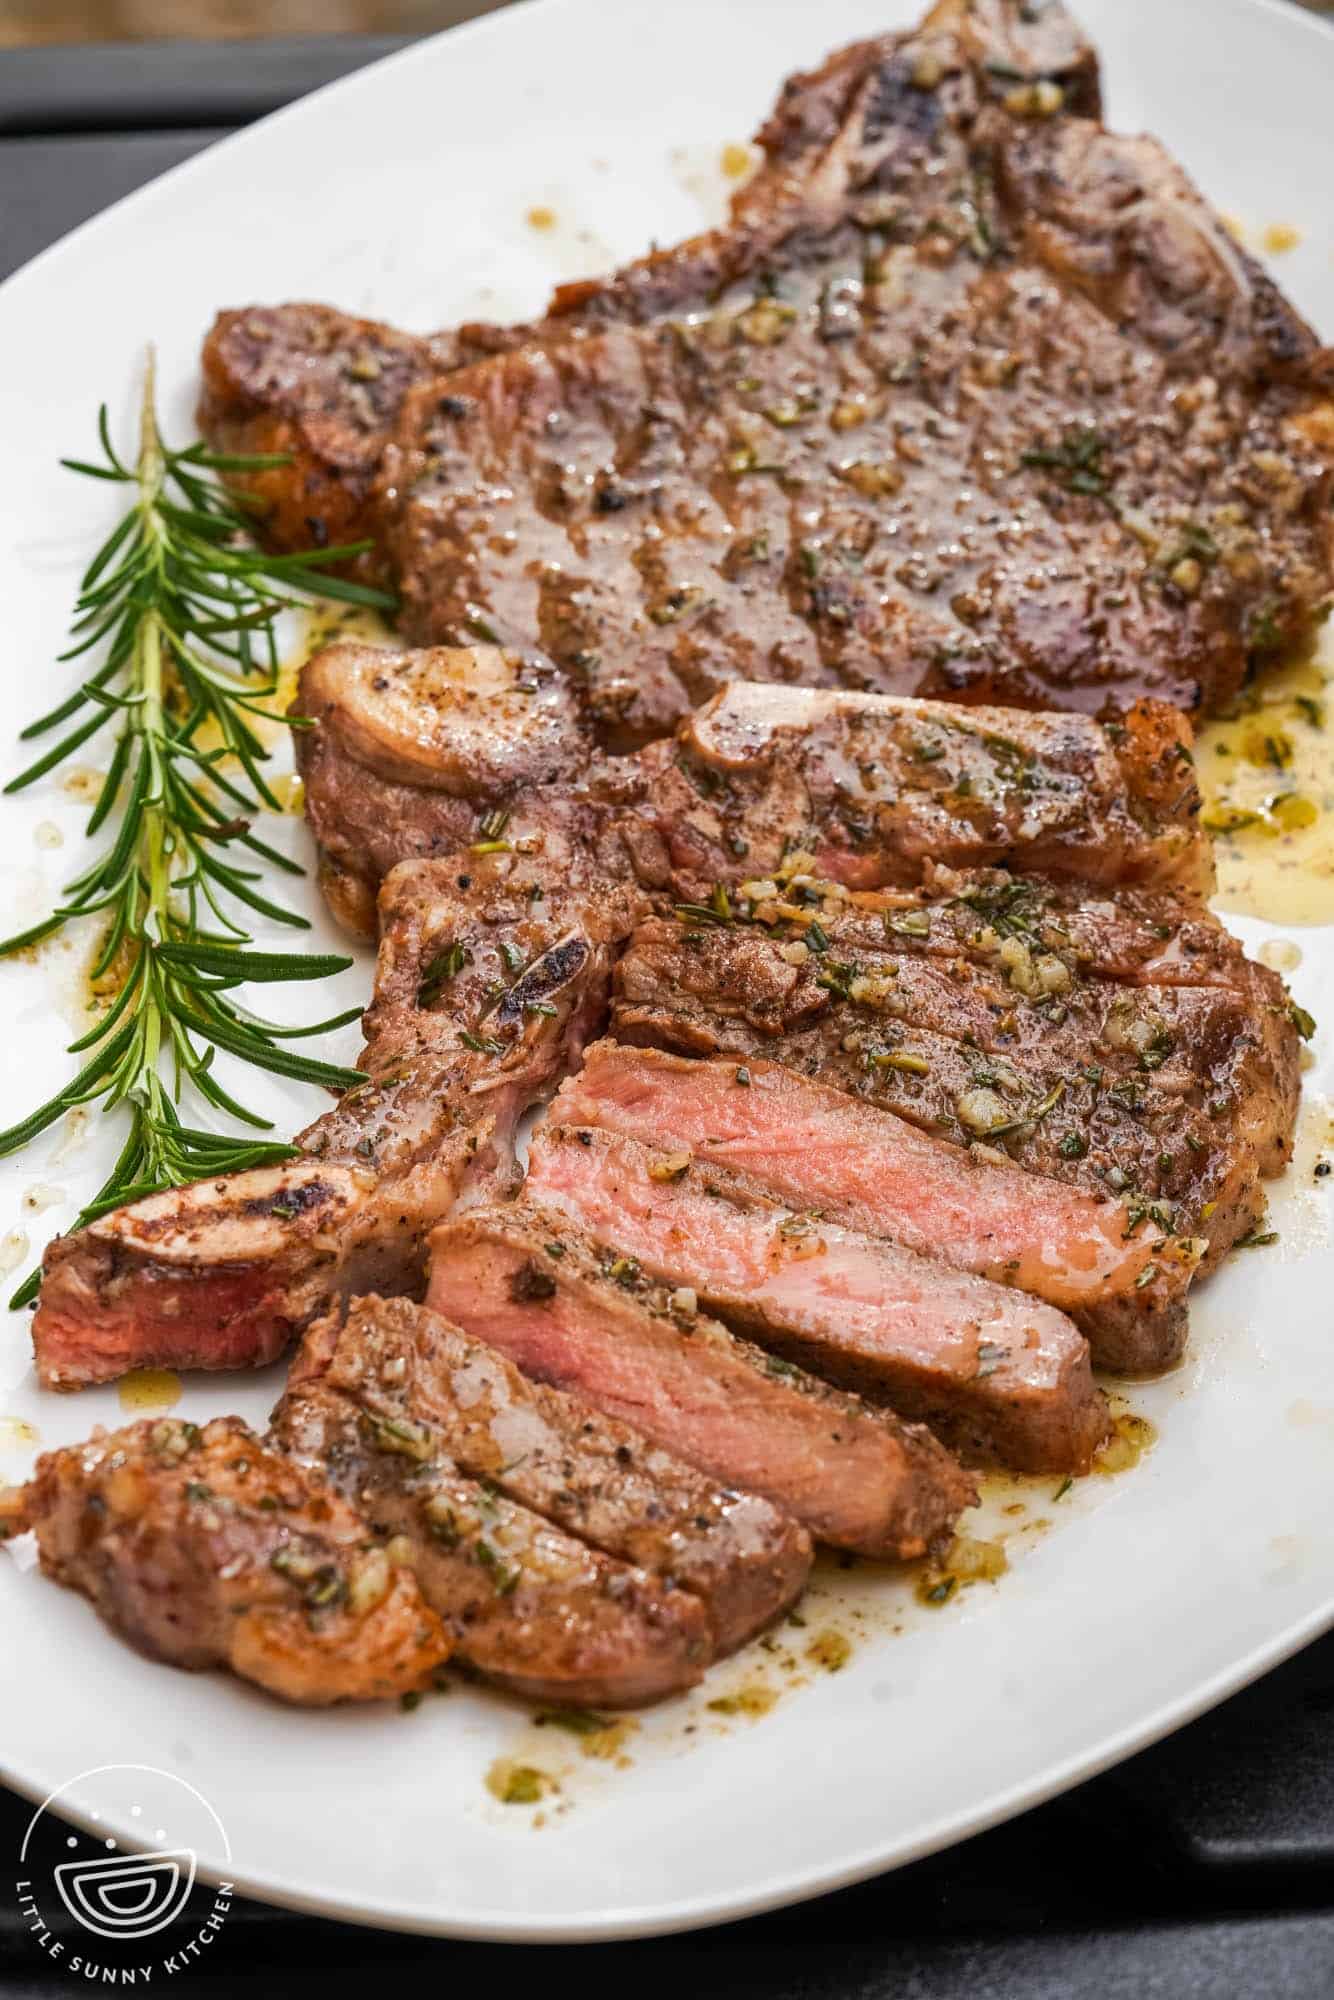 a platter holding grilled steaks, garnished with a sprig of rosemary.